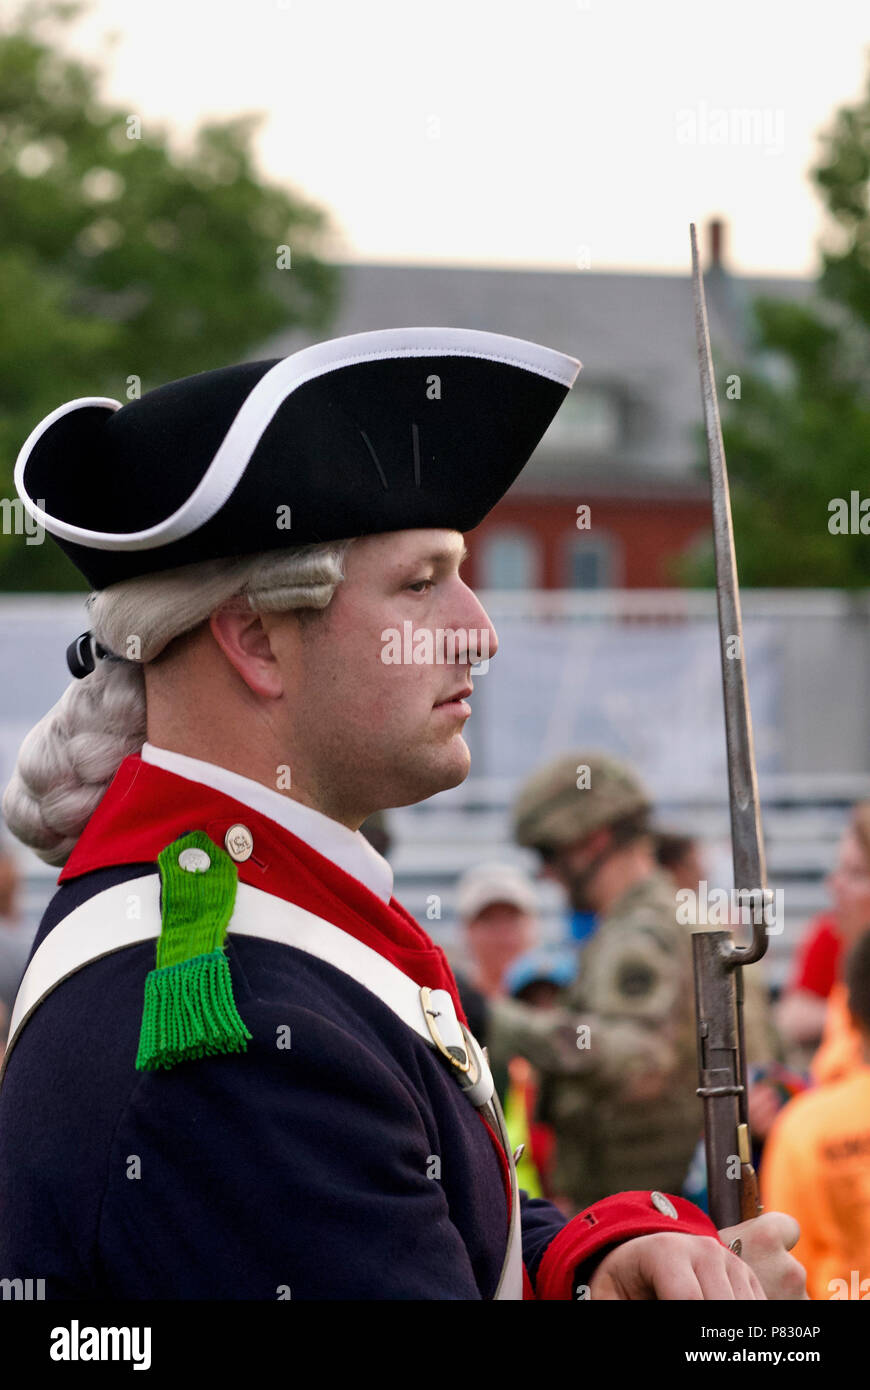 Fort Myer, Virginia, USA - June 13, 2018: A soldier of the U.S. Army's 'Old Guard' poses for tourist photos following a Twilight Tattoo performance. Stock Photo